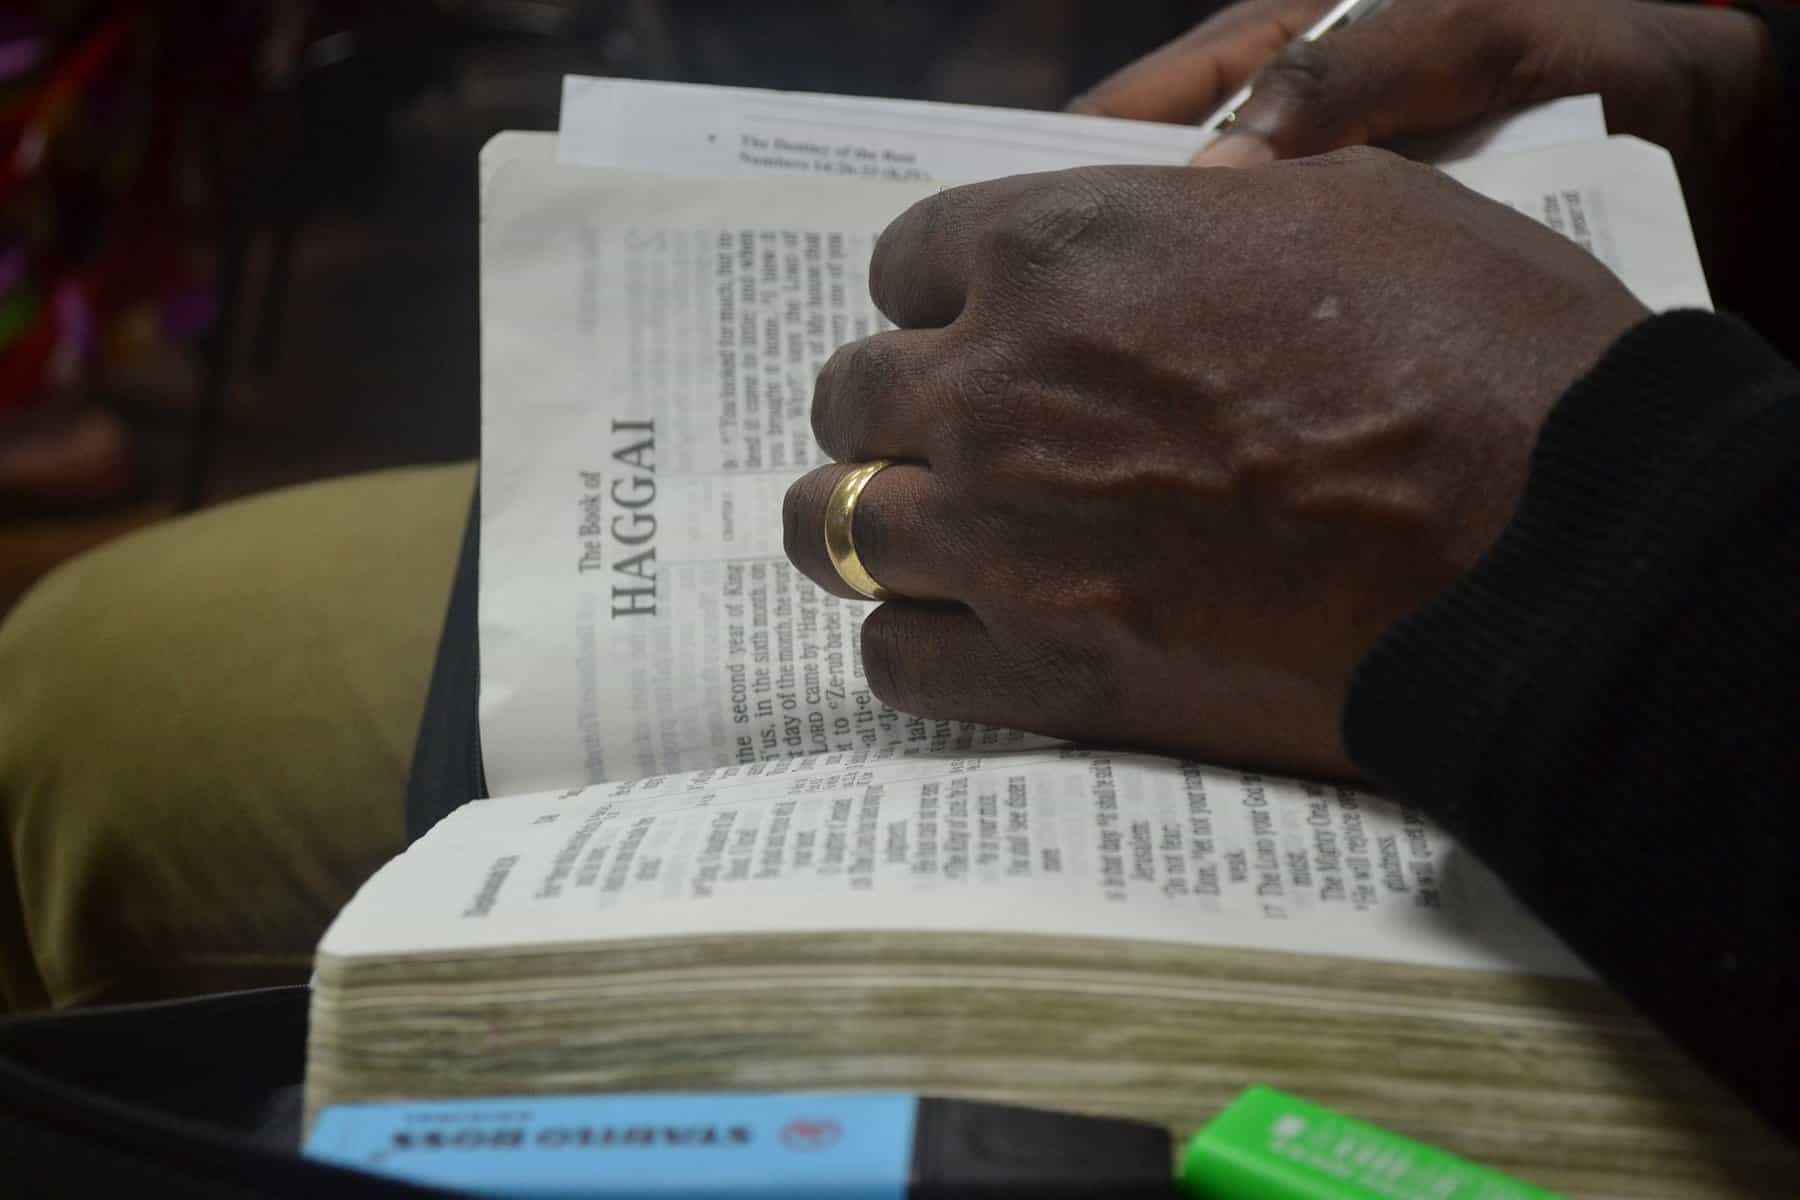 A Black man's hands are seen thumbing through a Bible showing the cover page for the book of Haggai.